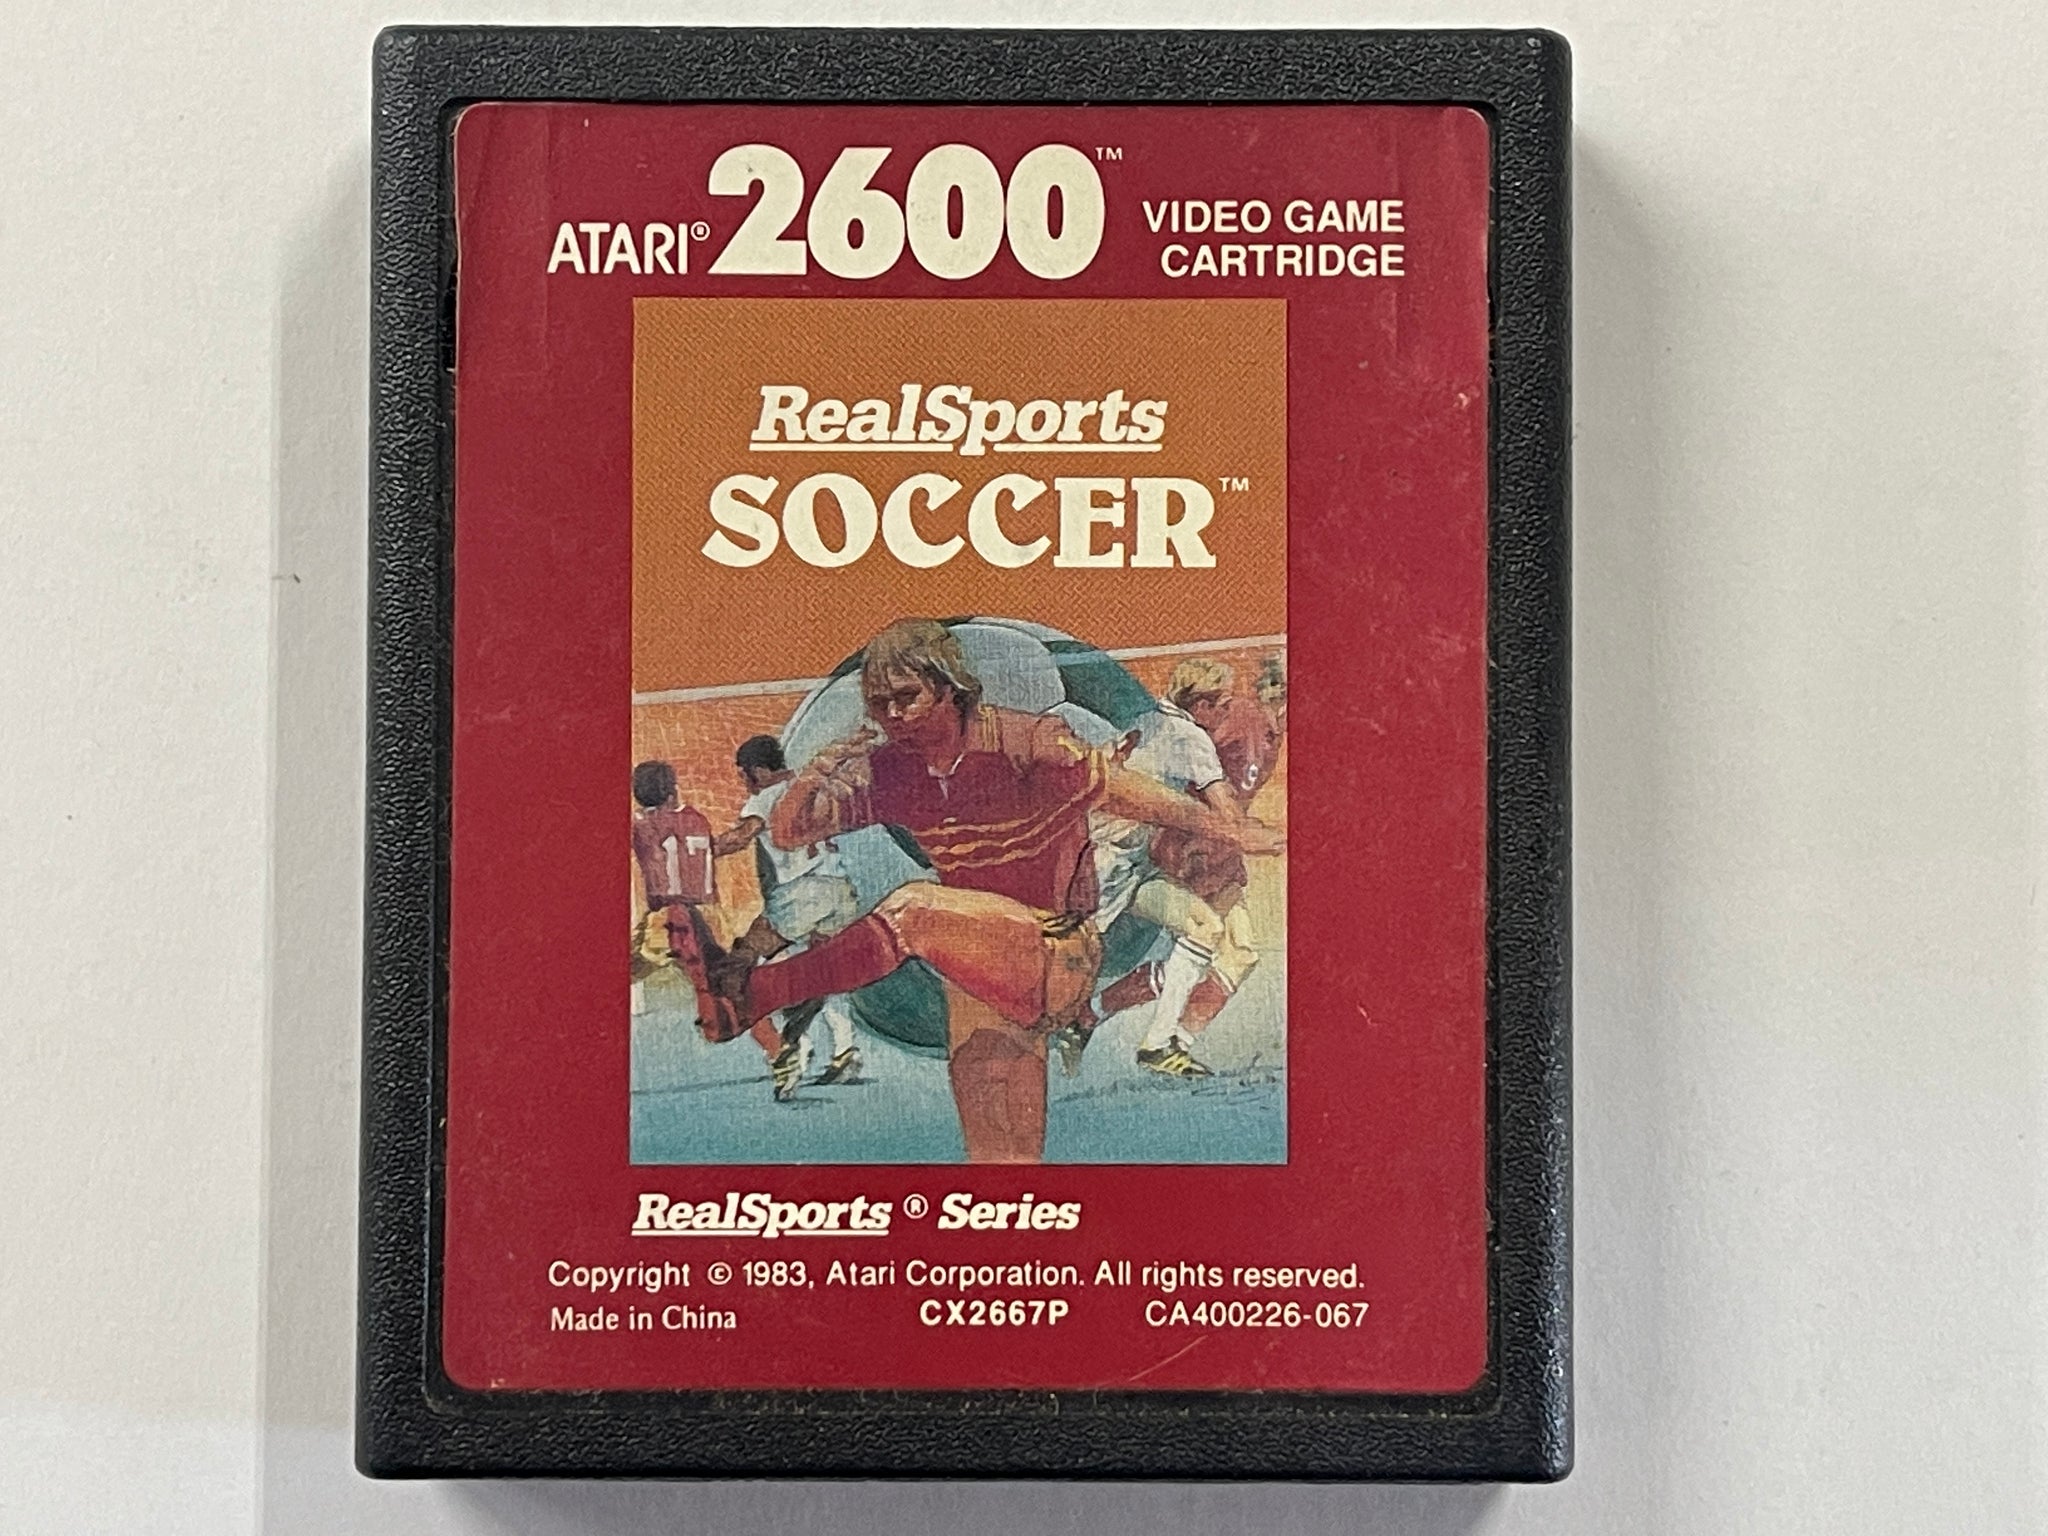 Real Time Soccer Cartridge